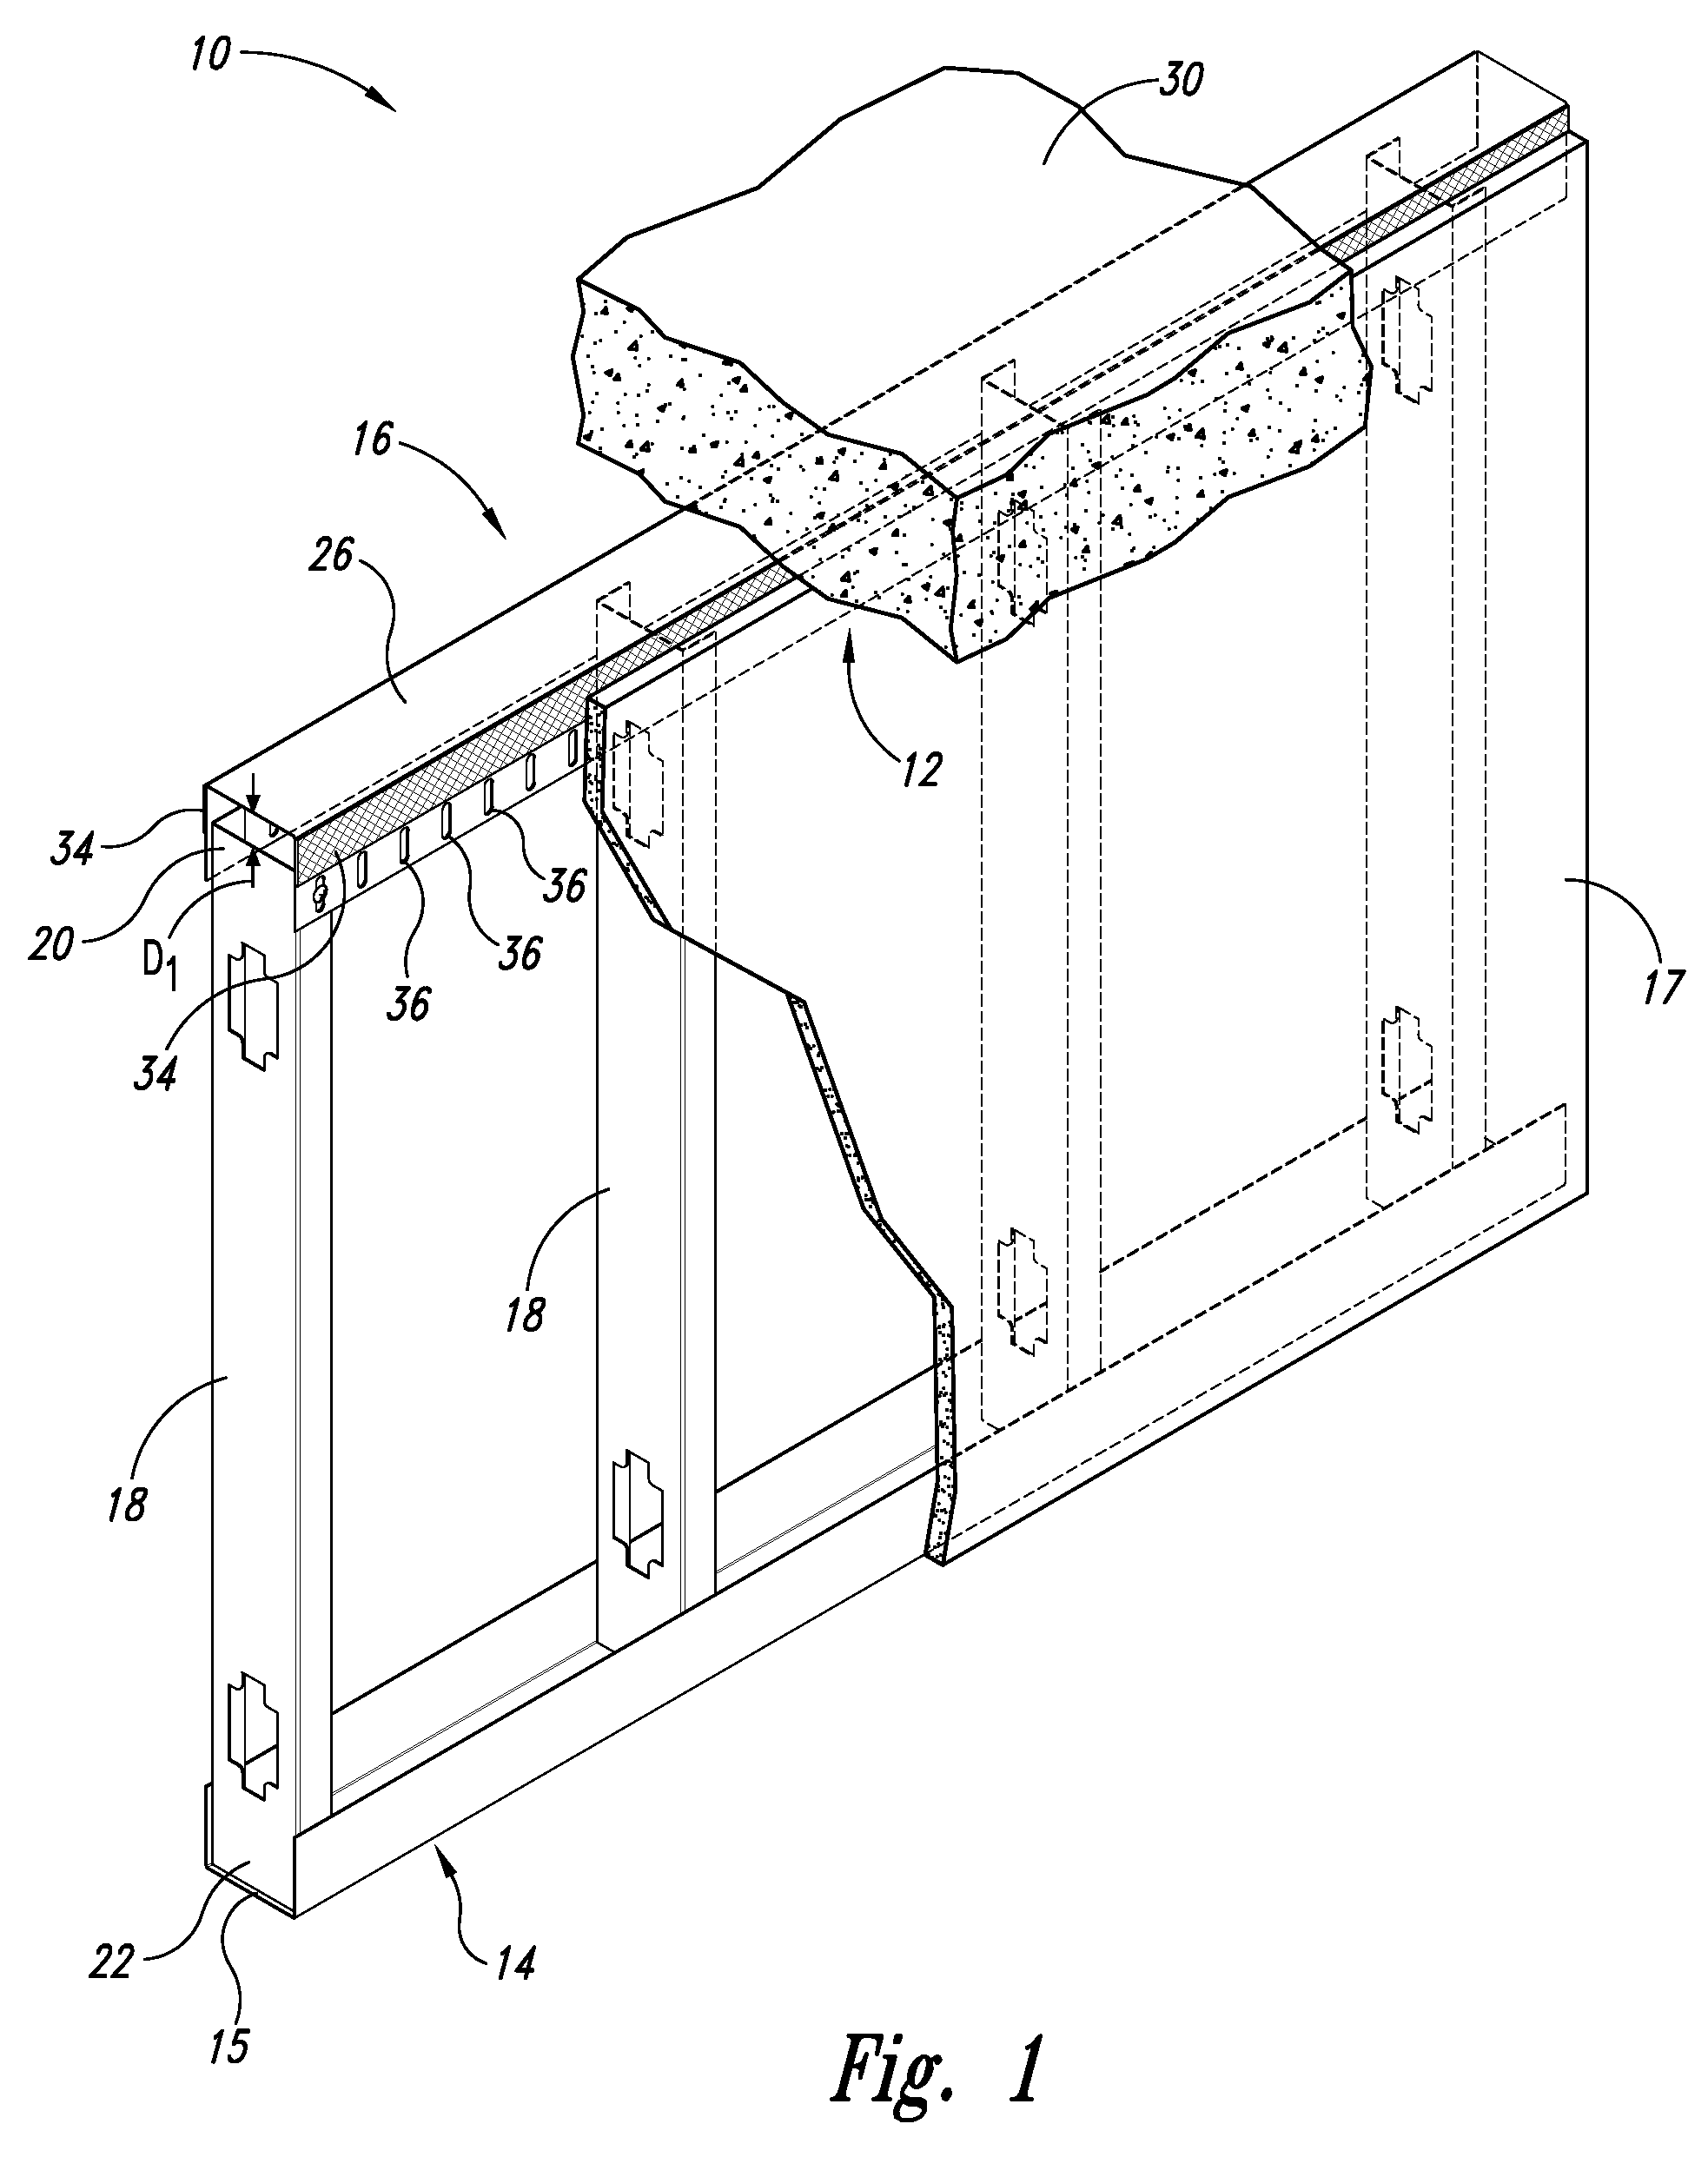 Head-of-wall fireblock systems and related wall assemblies